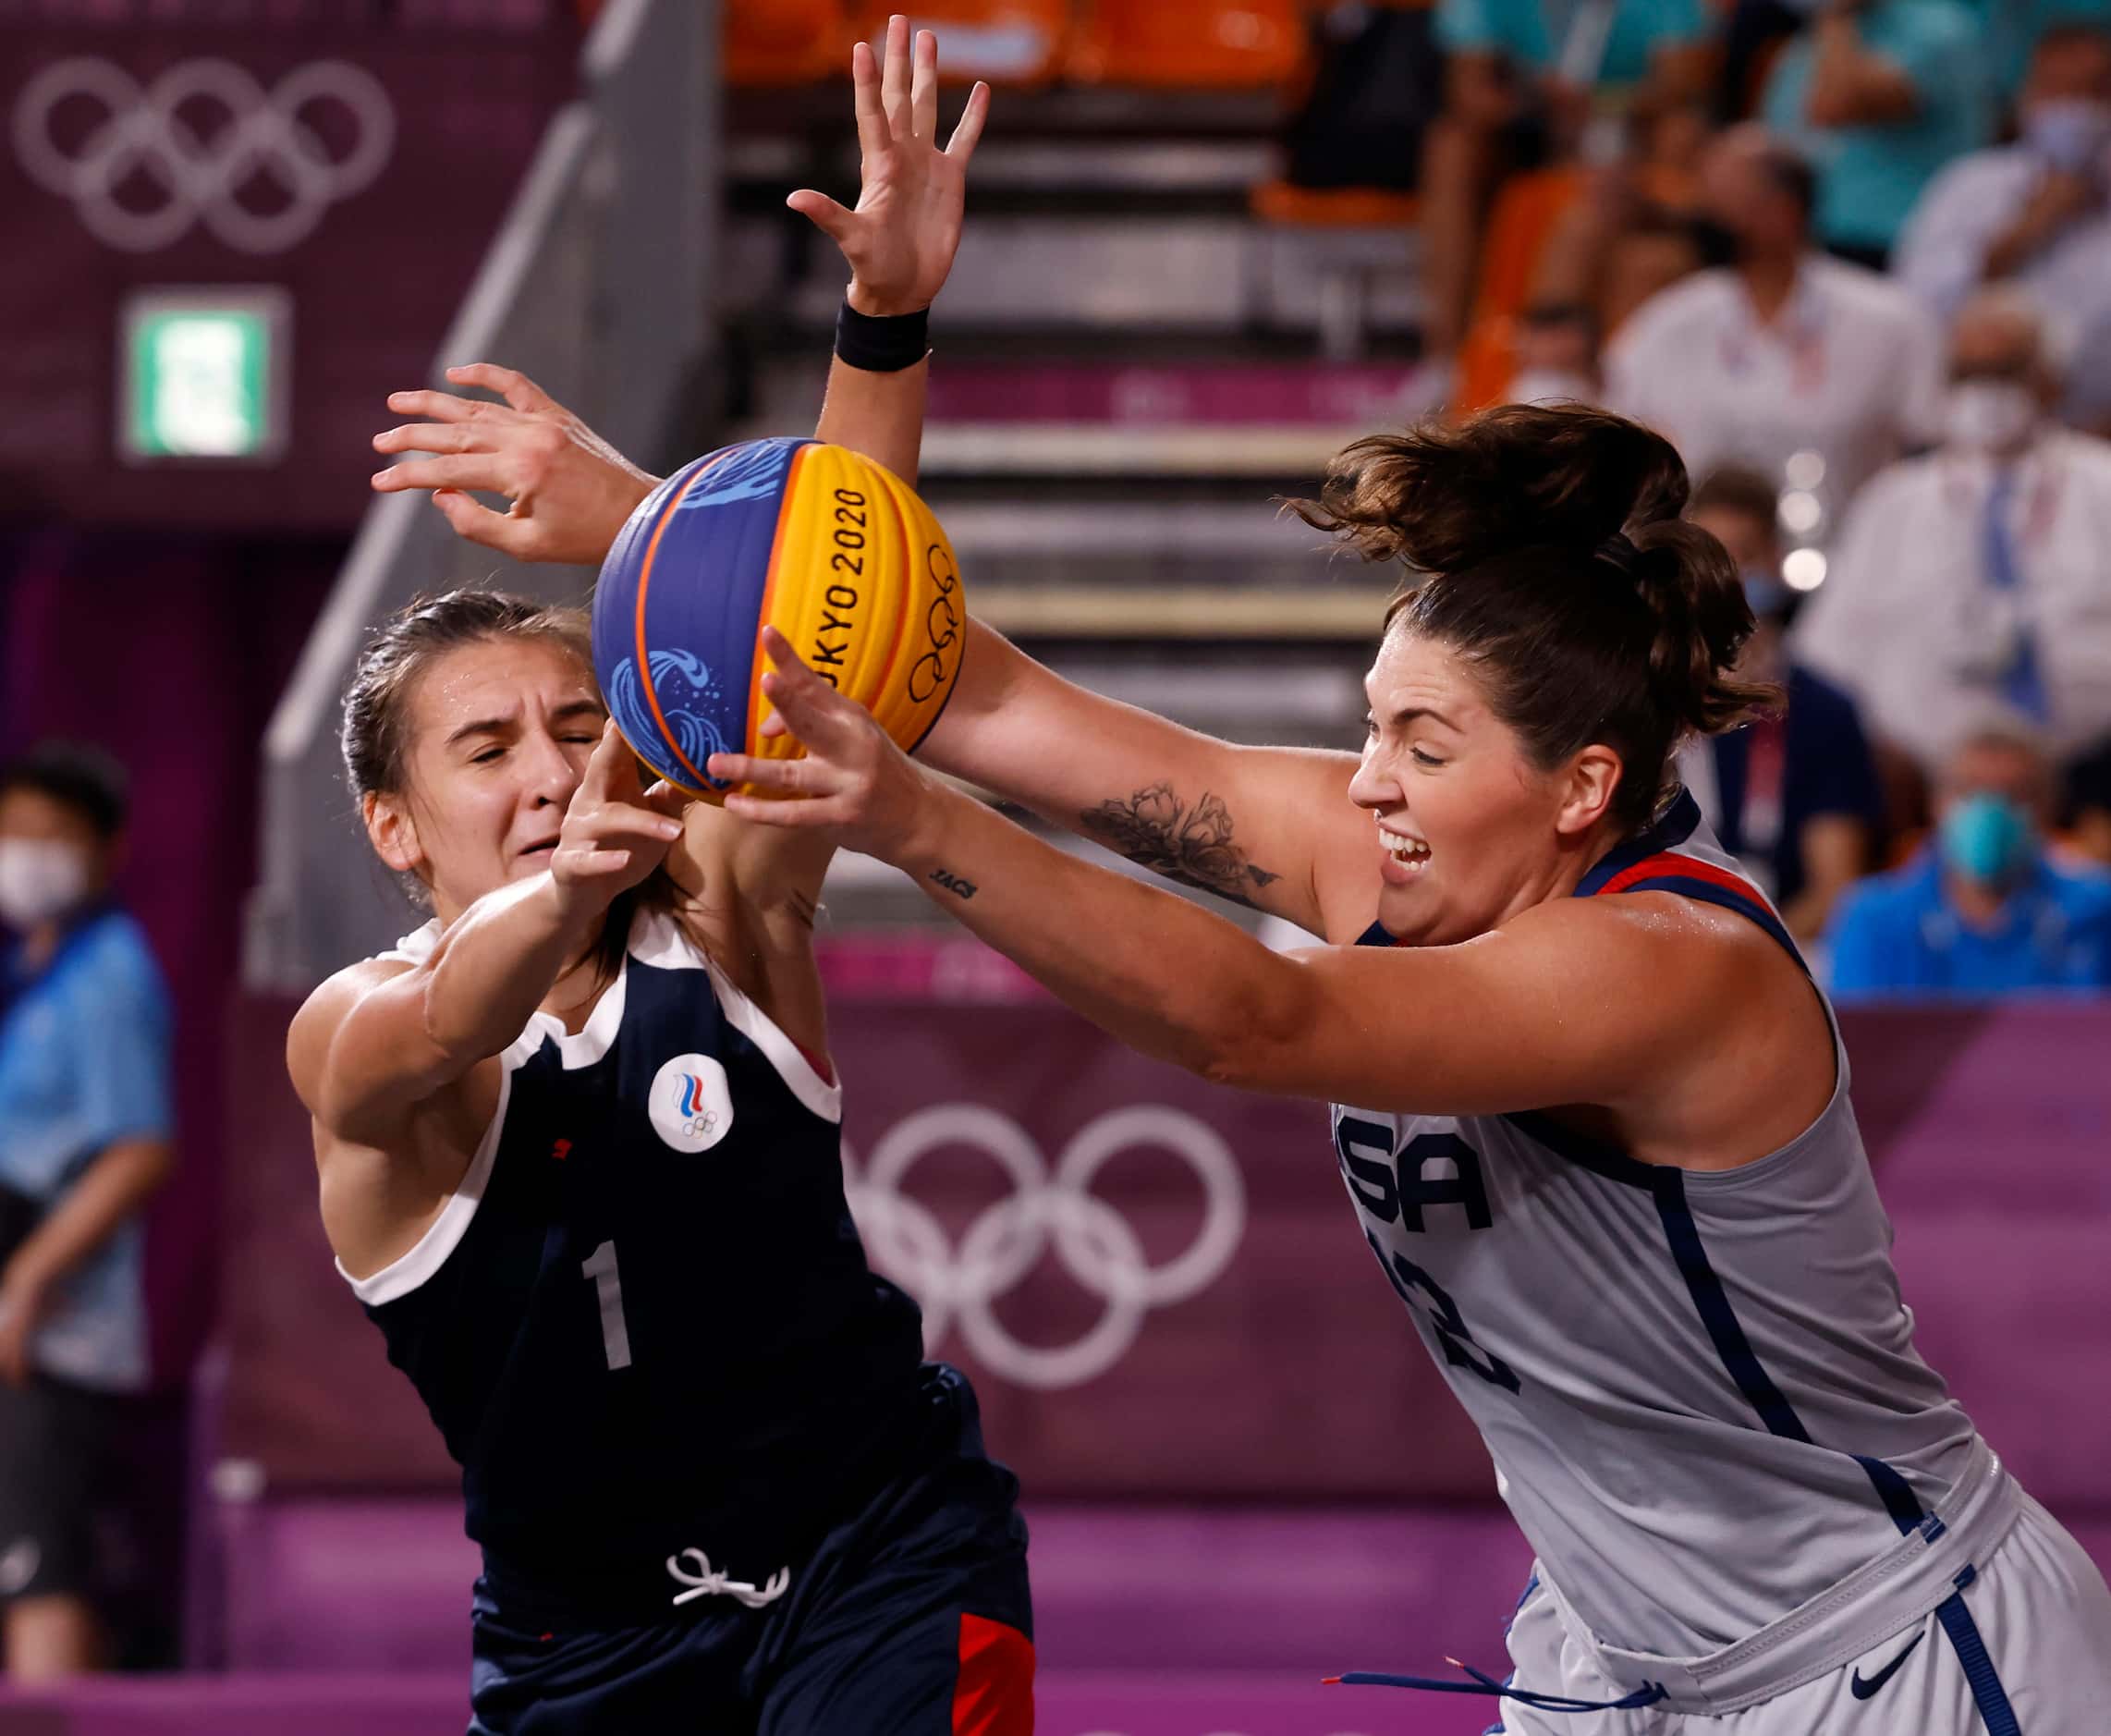 USA’s Stefanie Dolson (13) and ROC’s Yulia Kozik (1) go after a loose ball during the 3x3...